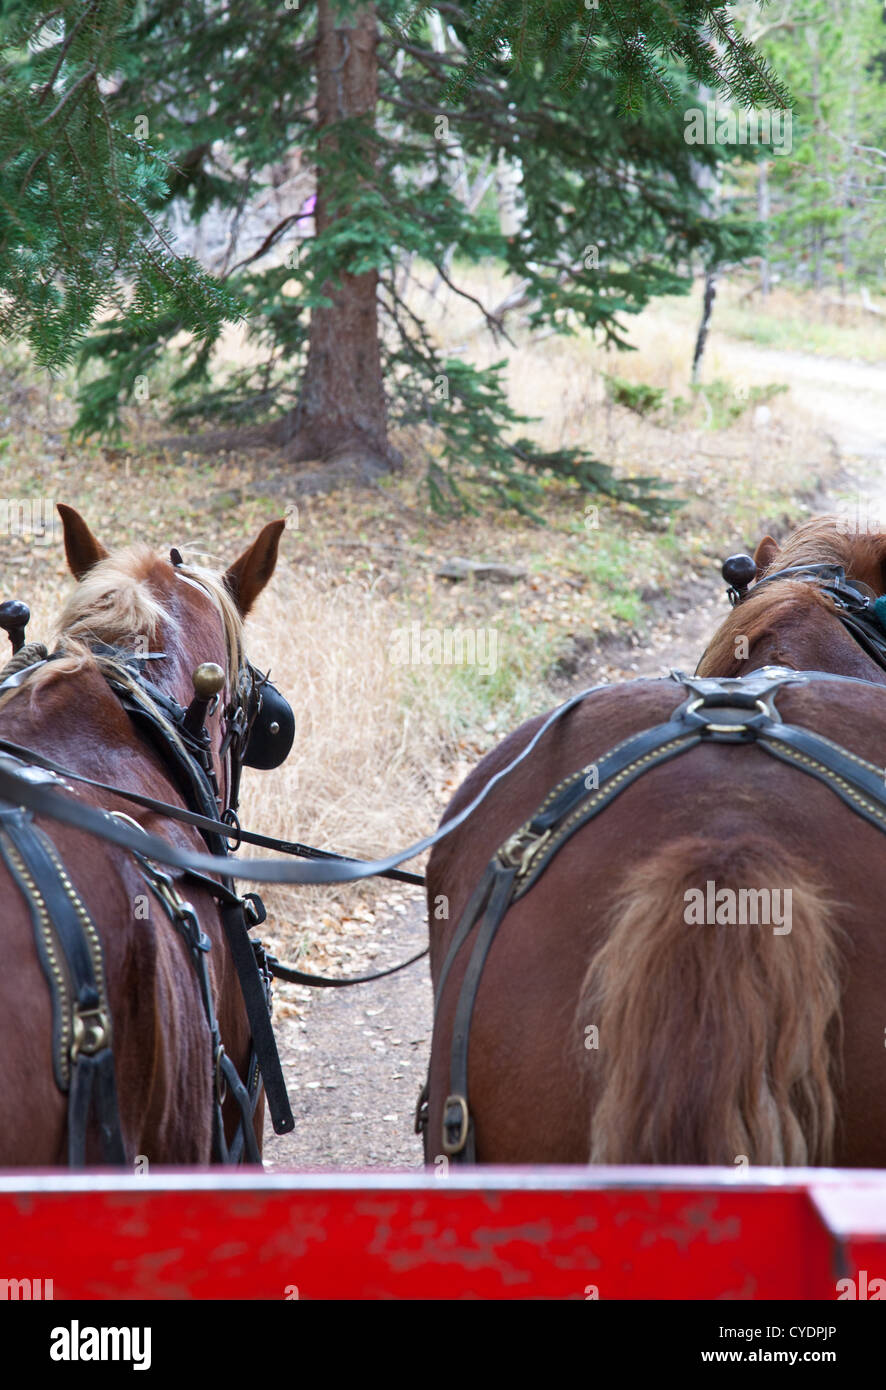 Belgian Draft Horses hitched for work. Estes Park, Colorado Stock Photo